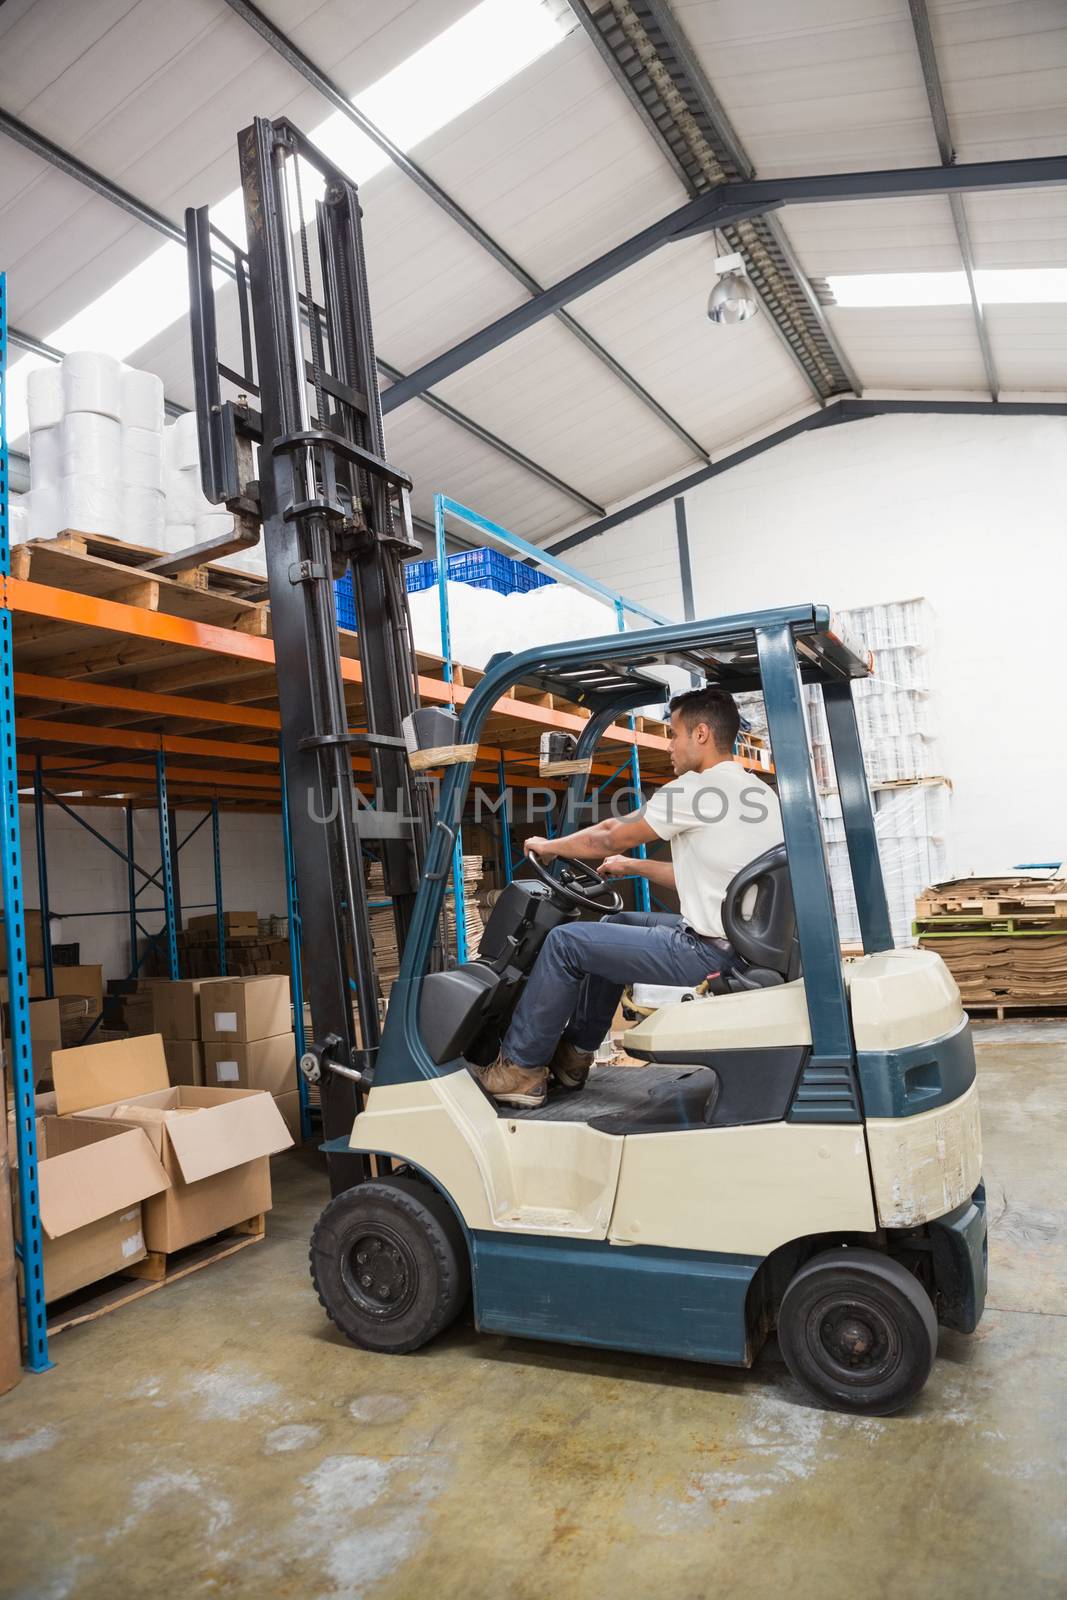 Forklift machine in a large warehouse by Wavebreakmedia